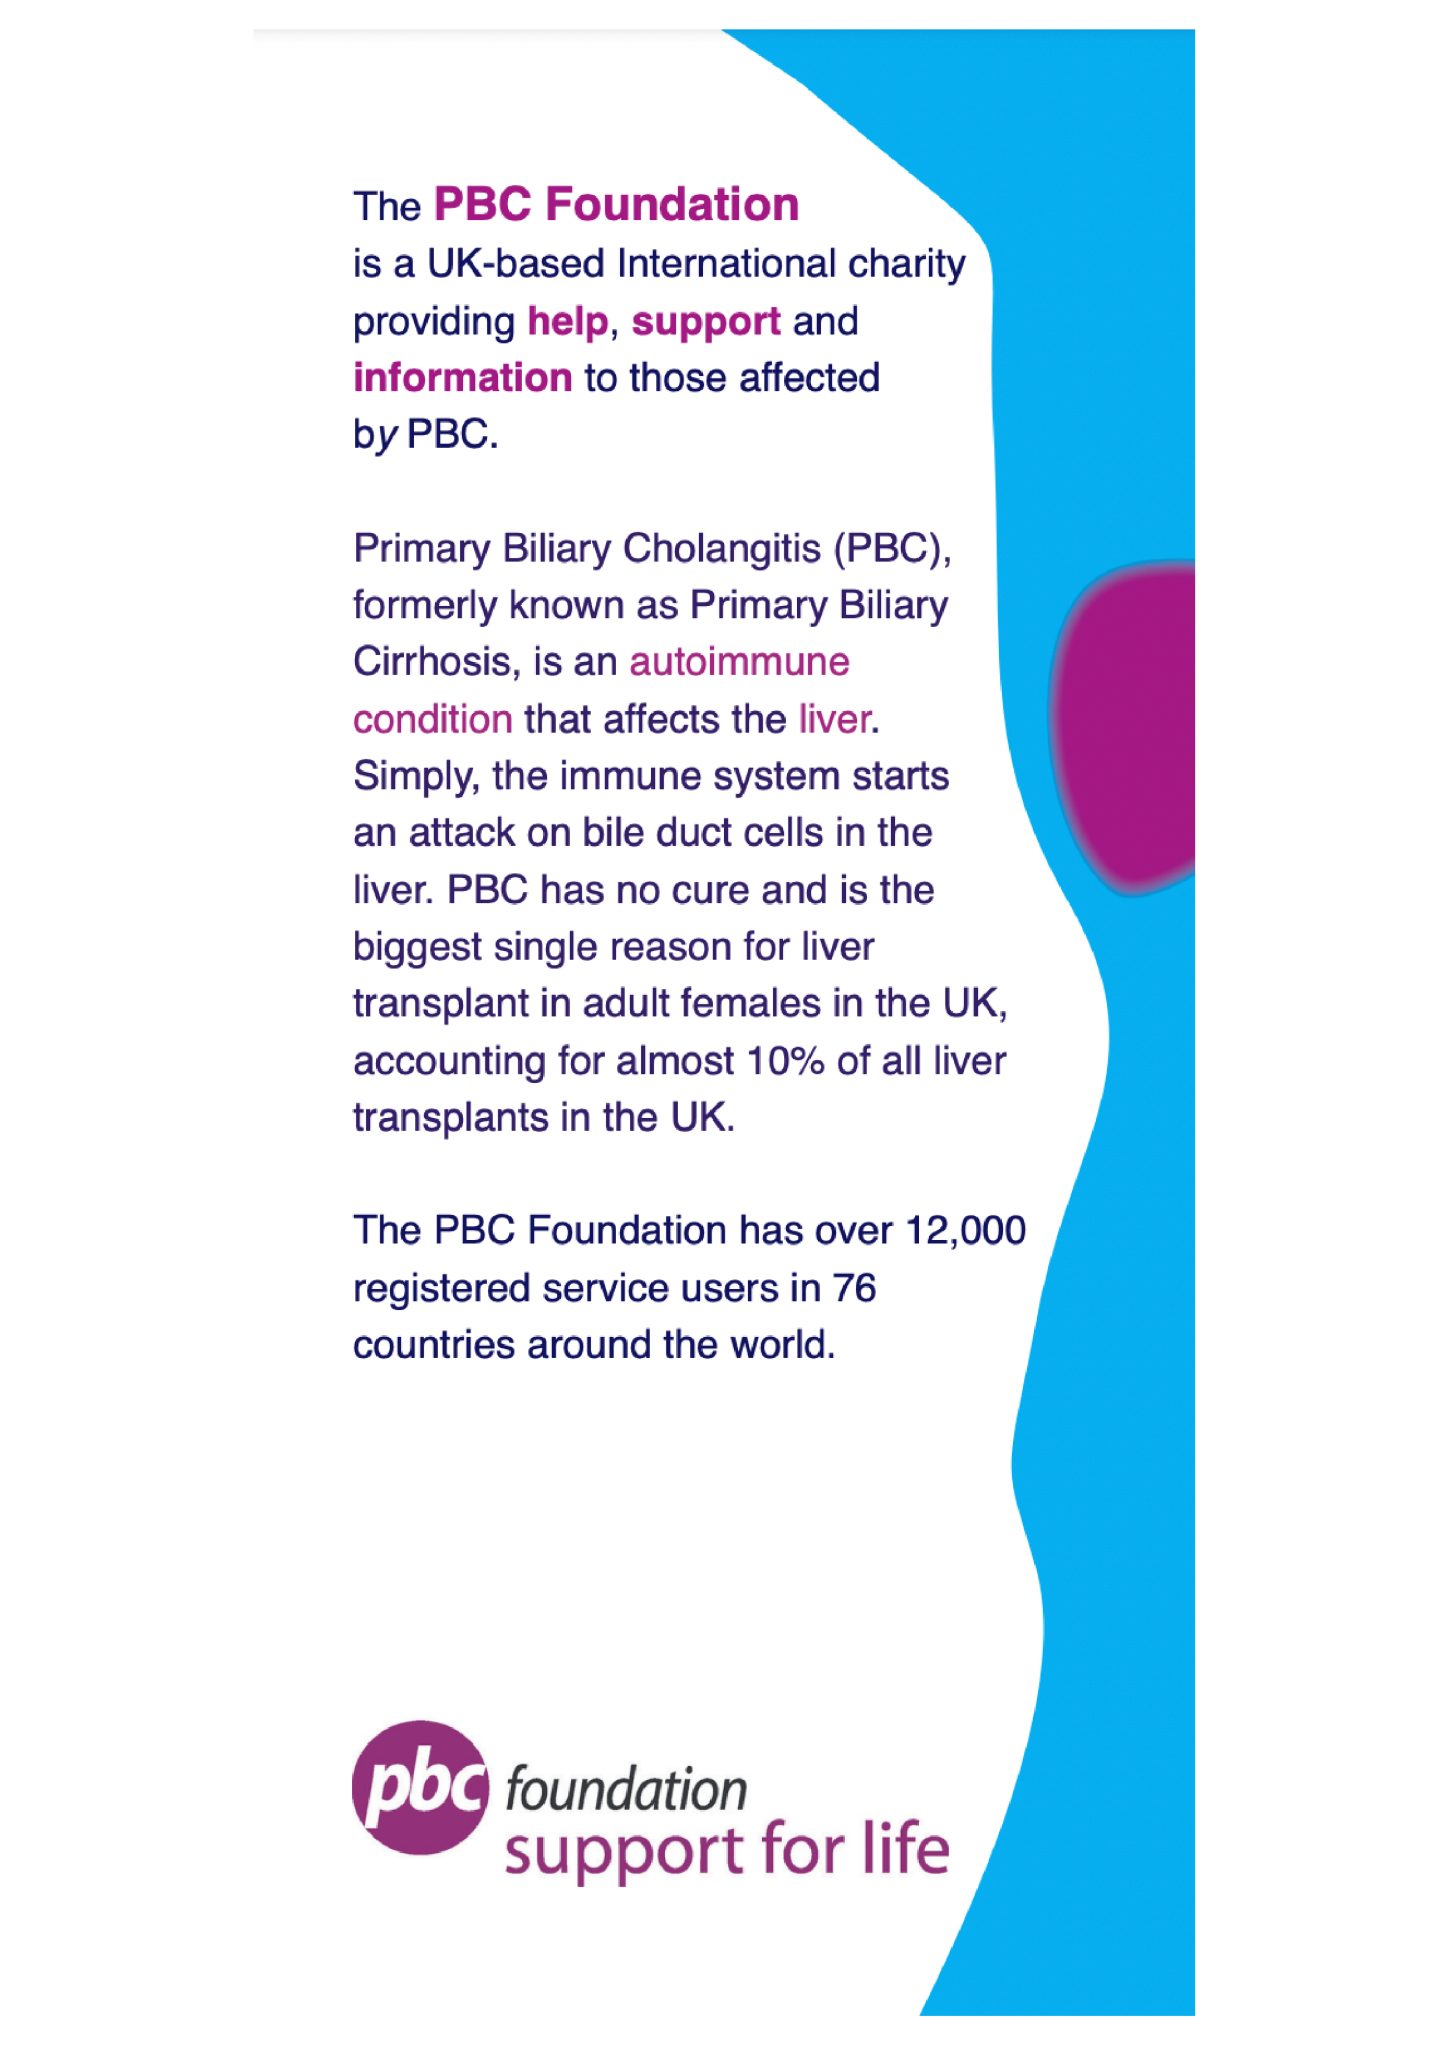 Cover of the PBC Foundation general Information Leaflet